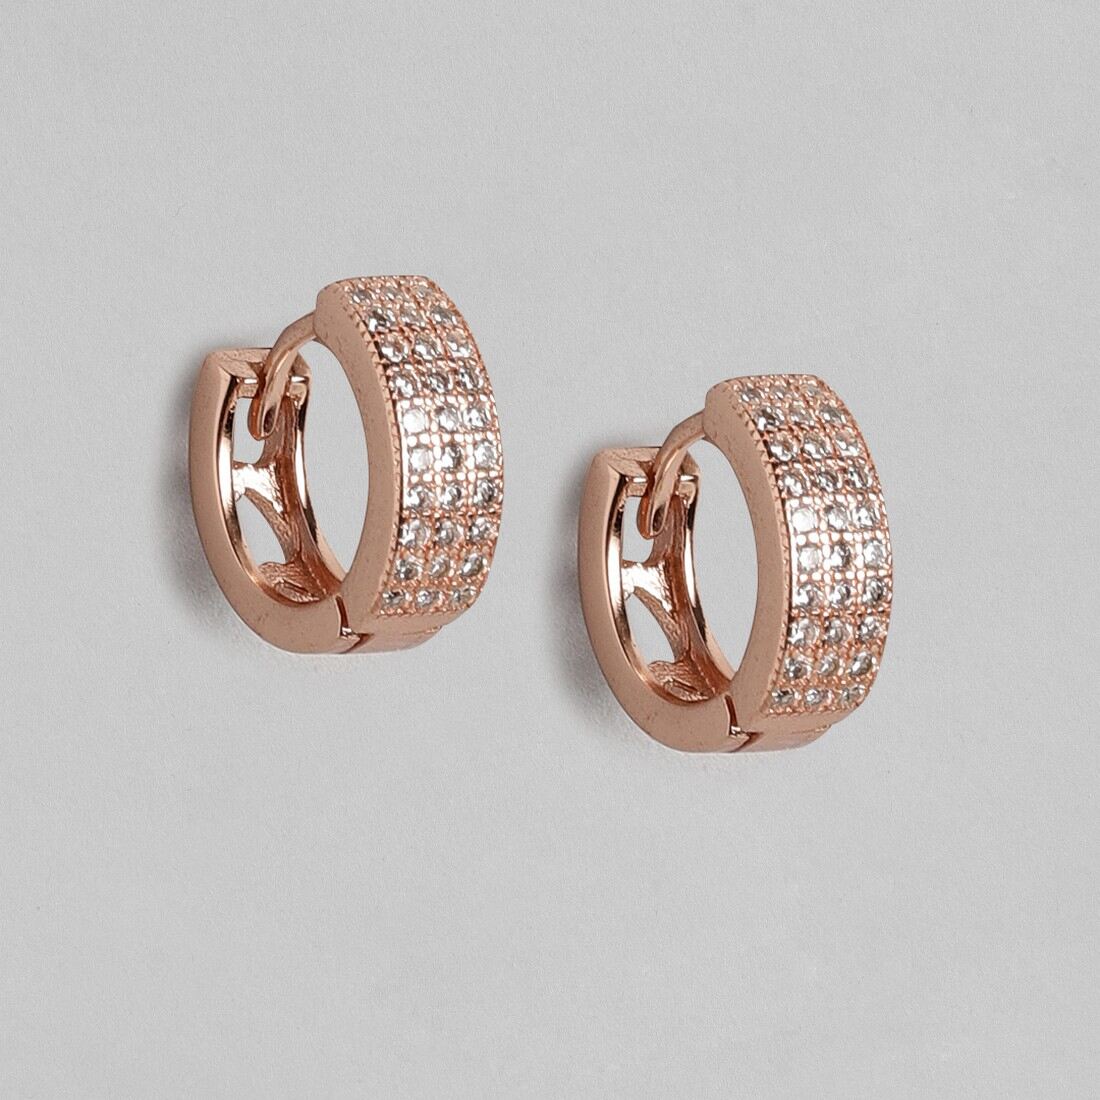 Unapologetic and Gorgeous 925 Silver Hoop Earrings in Rose Gold